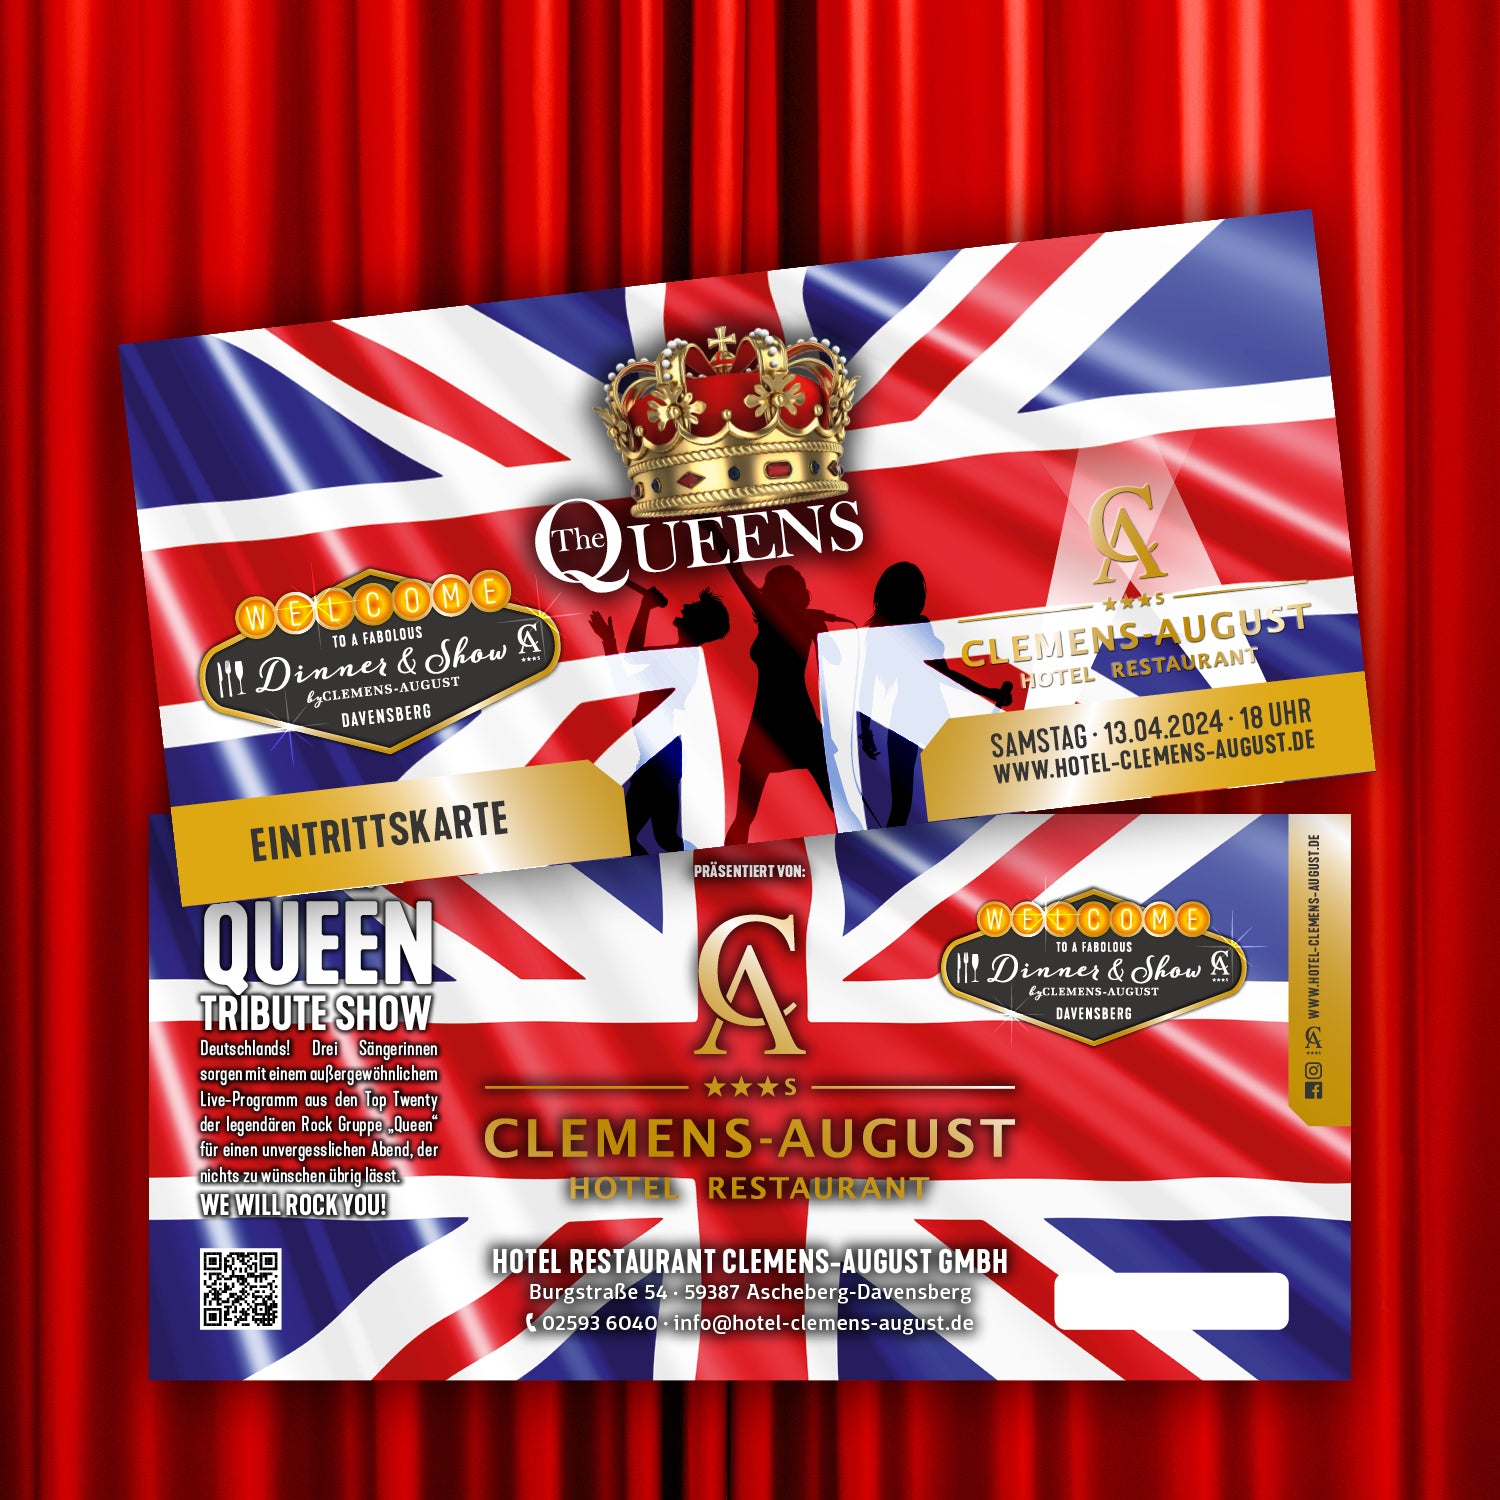 The Queens - Tribute Show